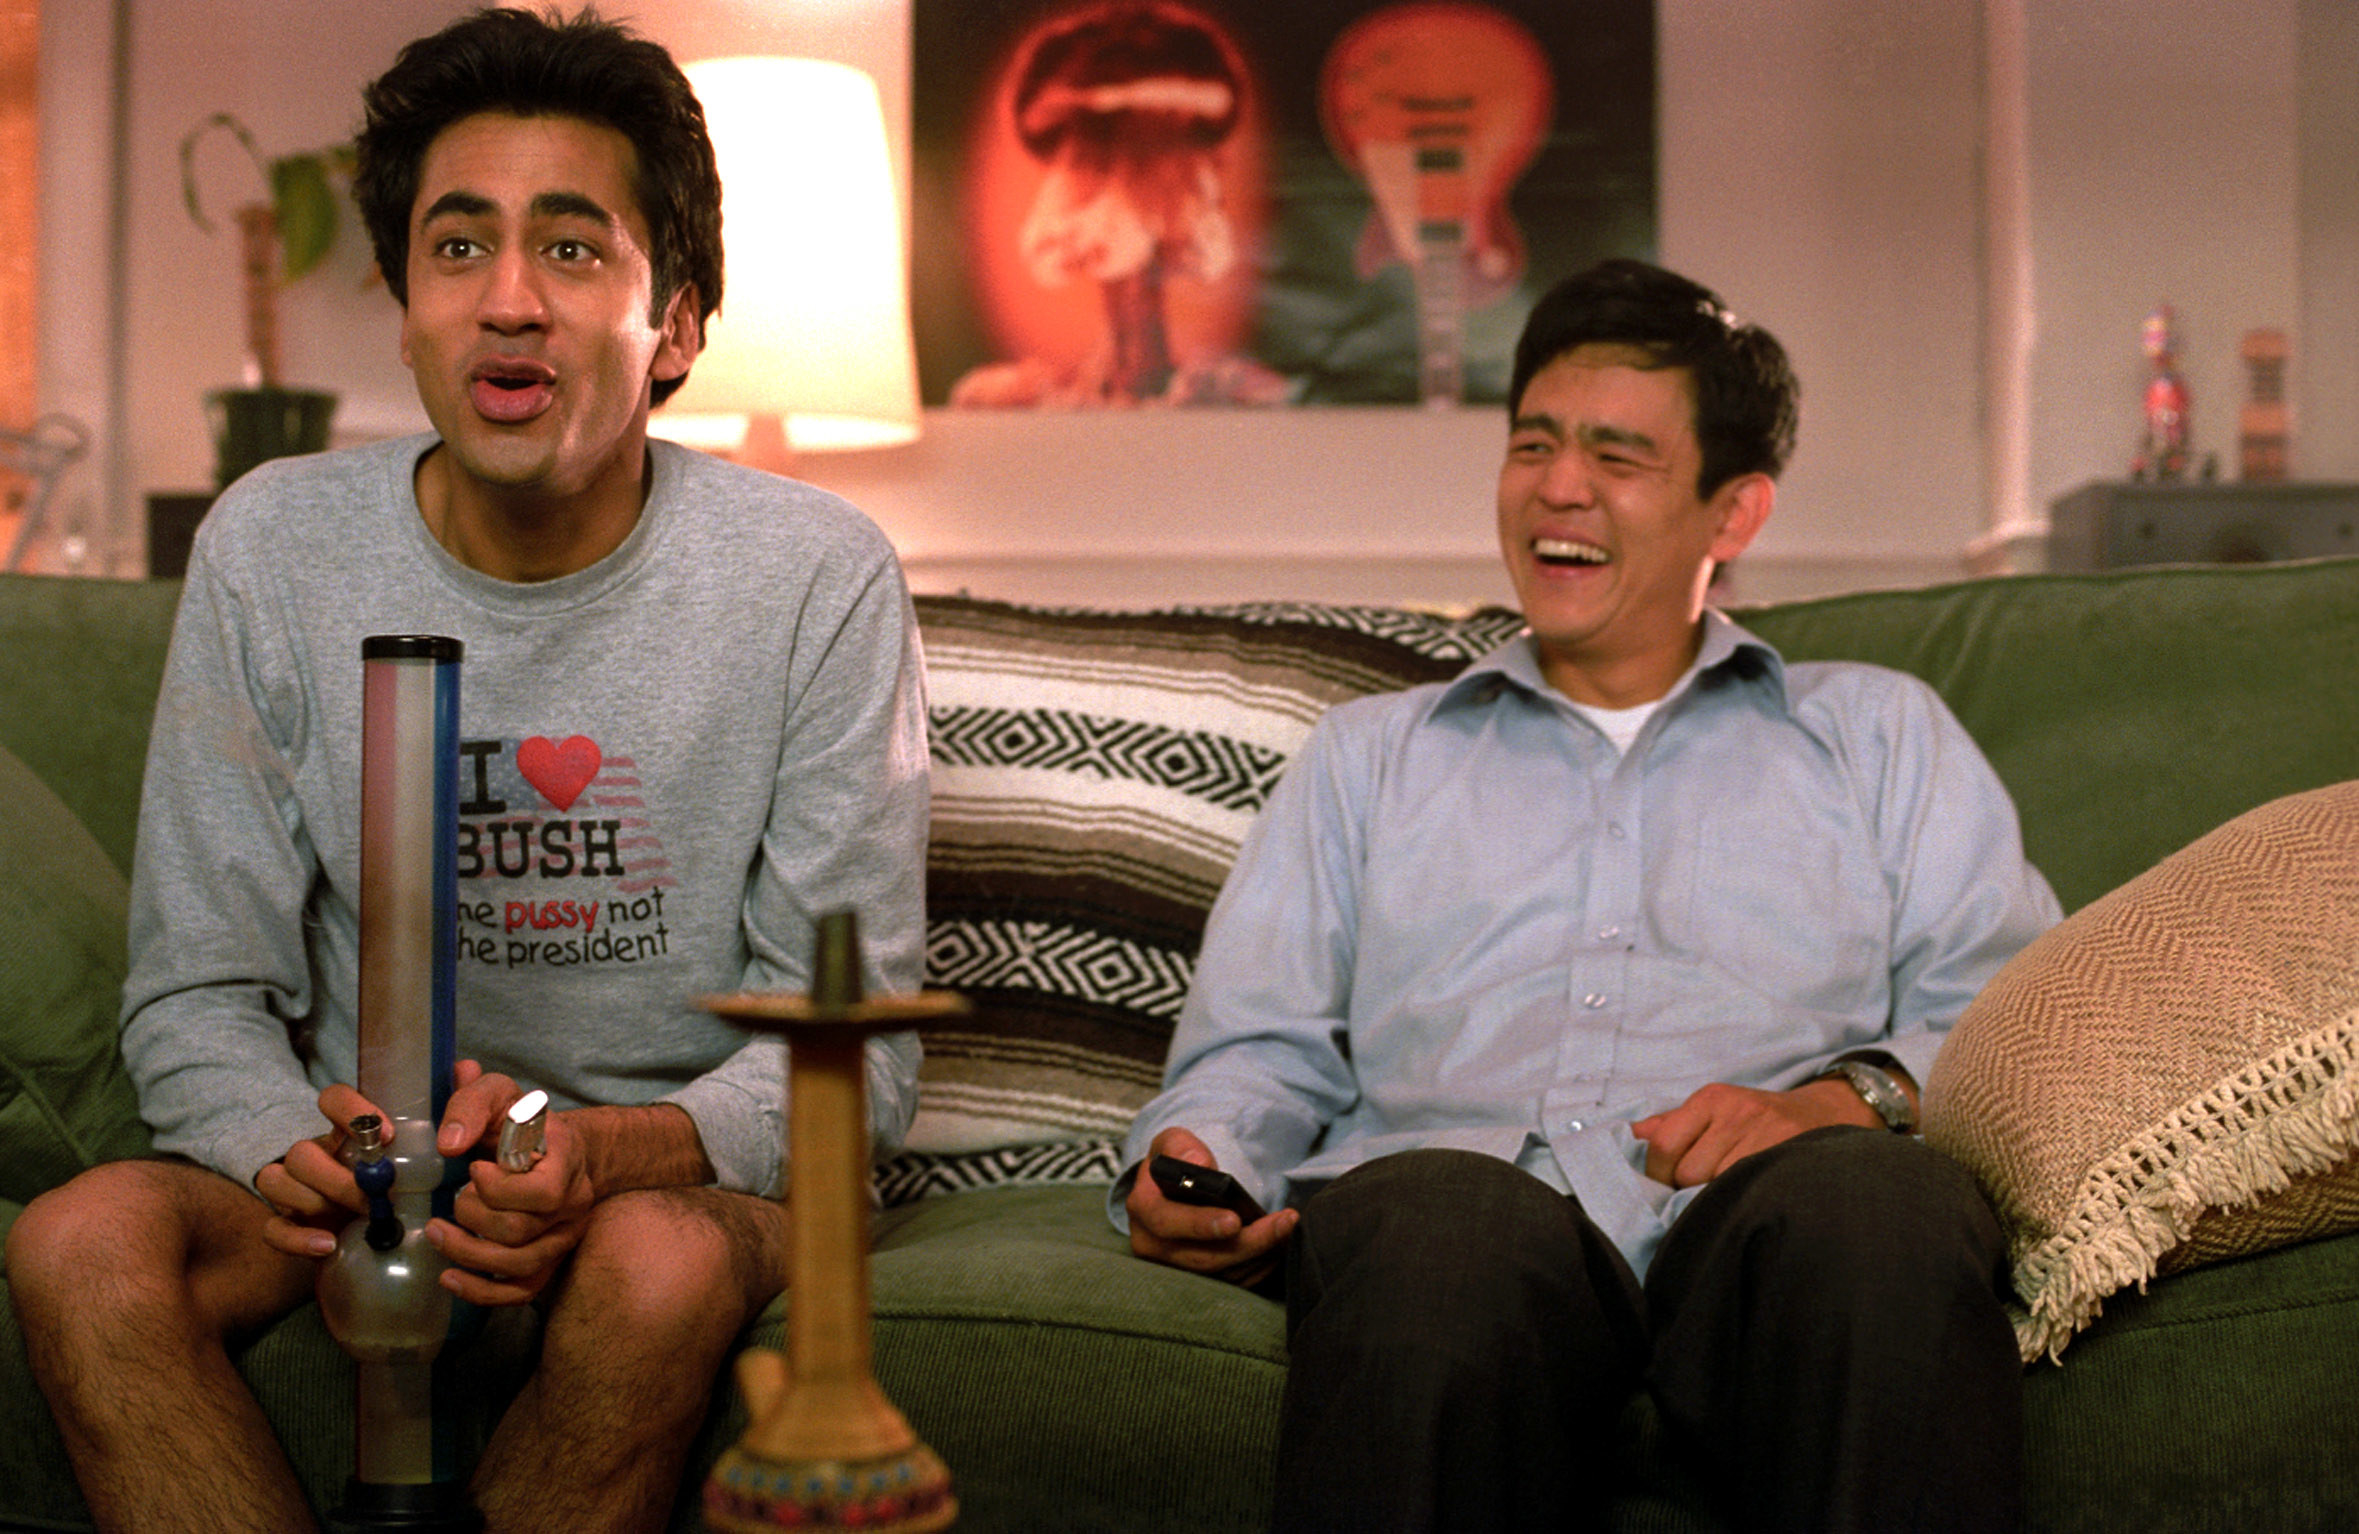 Harold and Kumar smoking on the couch